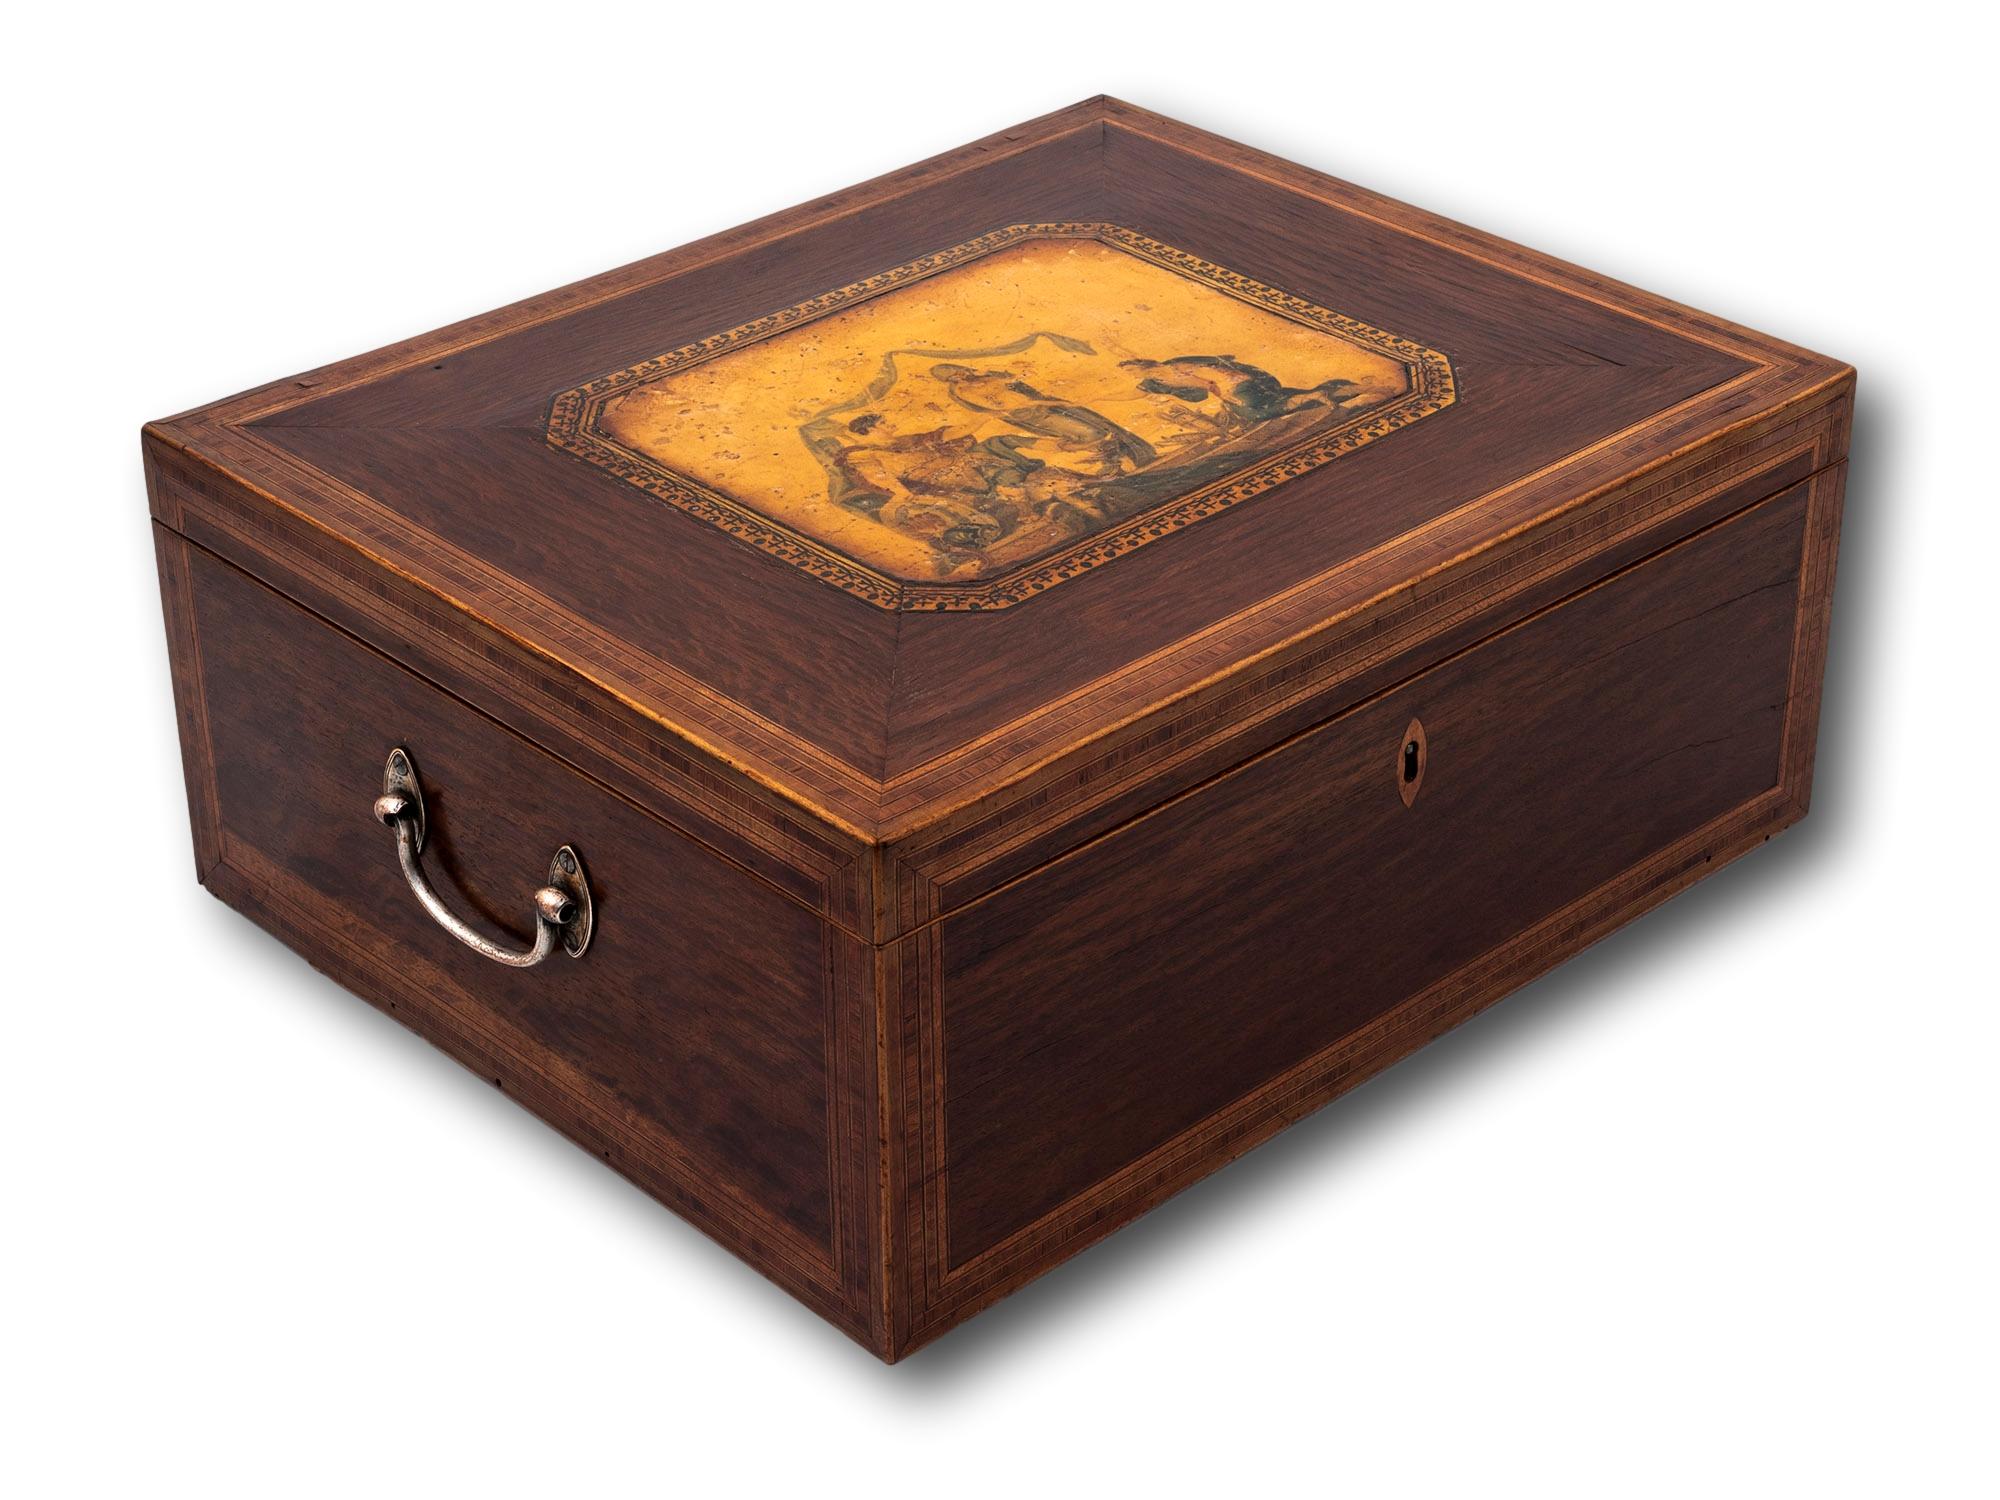 Hand-Painted Regency Tunbridge Ware Sewing Box For Sale